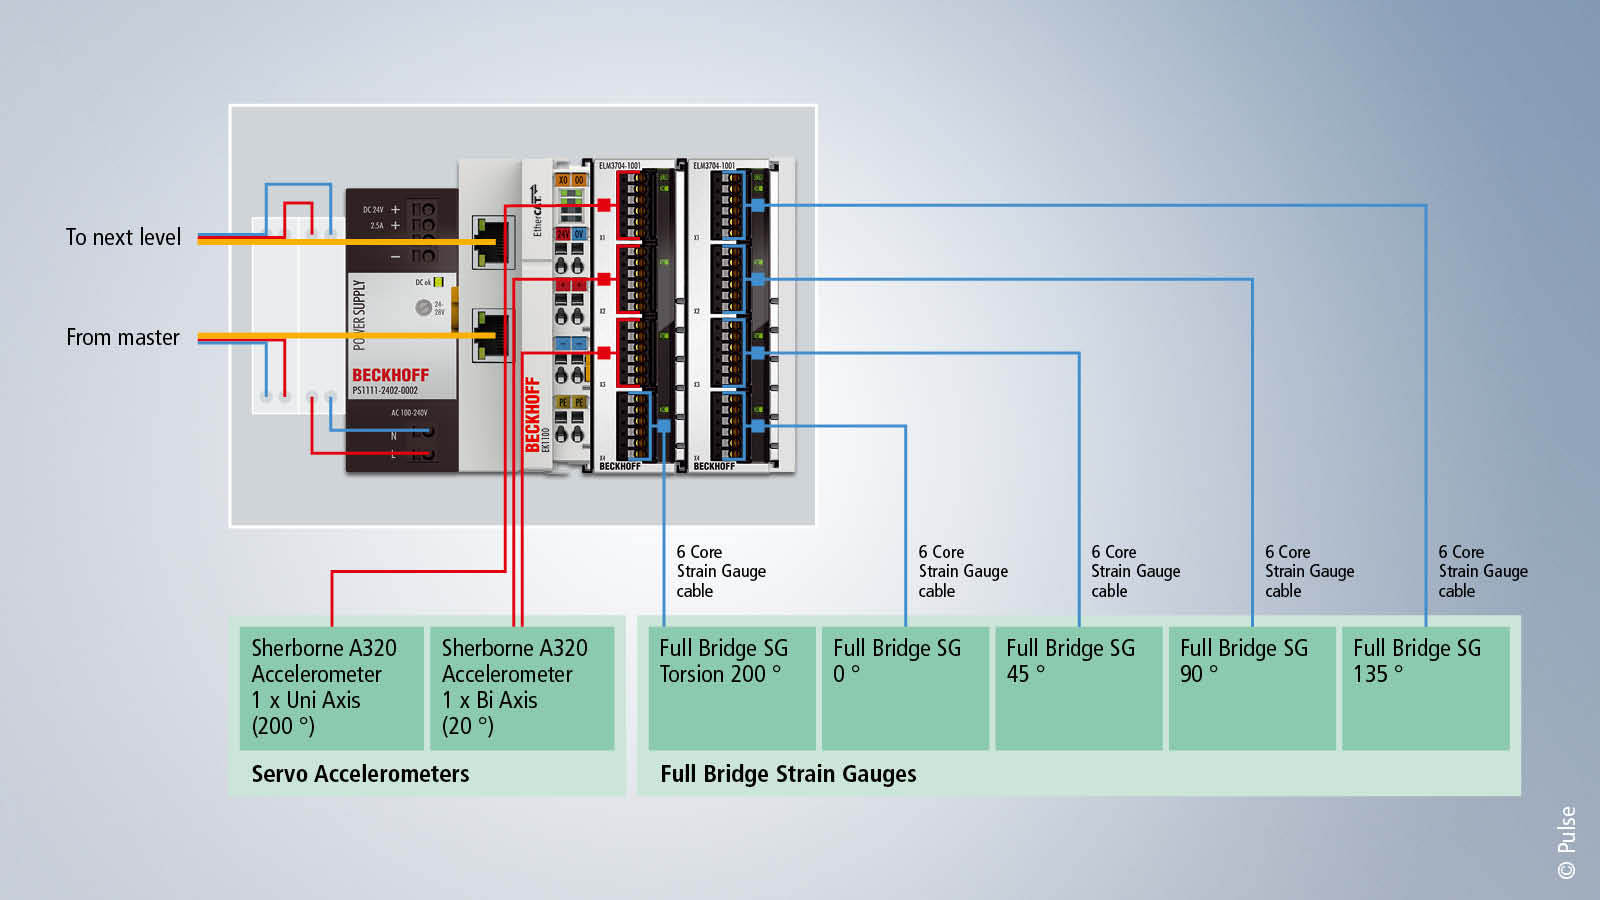 Decentralized data acquisition system for the four upper tower levels, consisting of two ELM3704 EtherCAT Terminals, an EK1100 EtherCAT Coupler and a power supply PS1011 